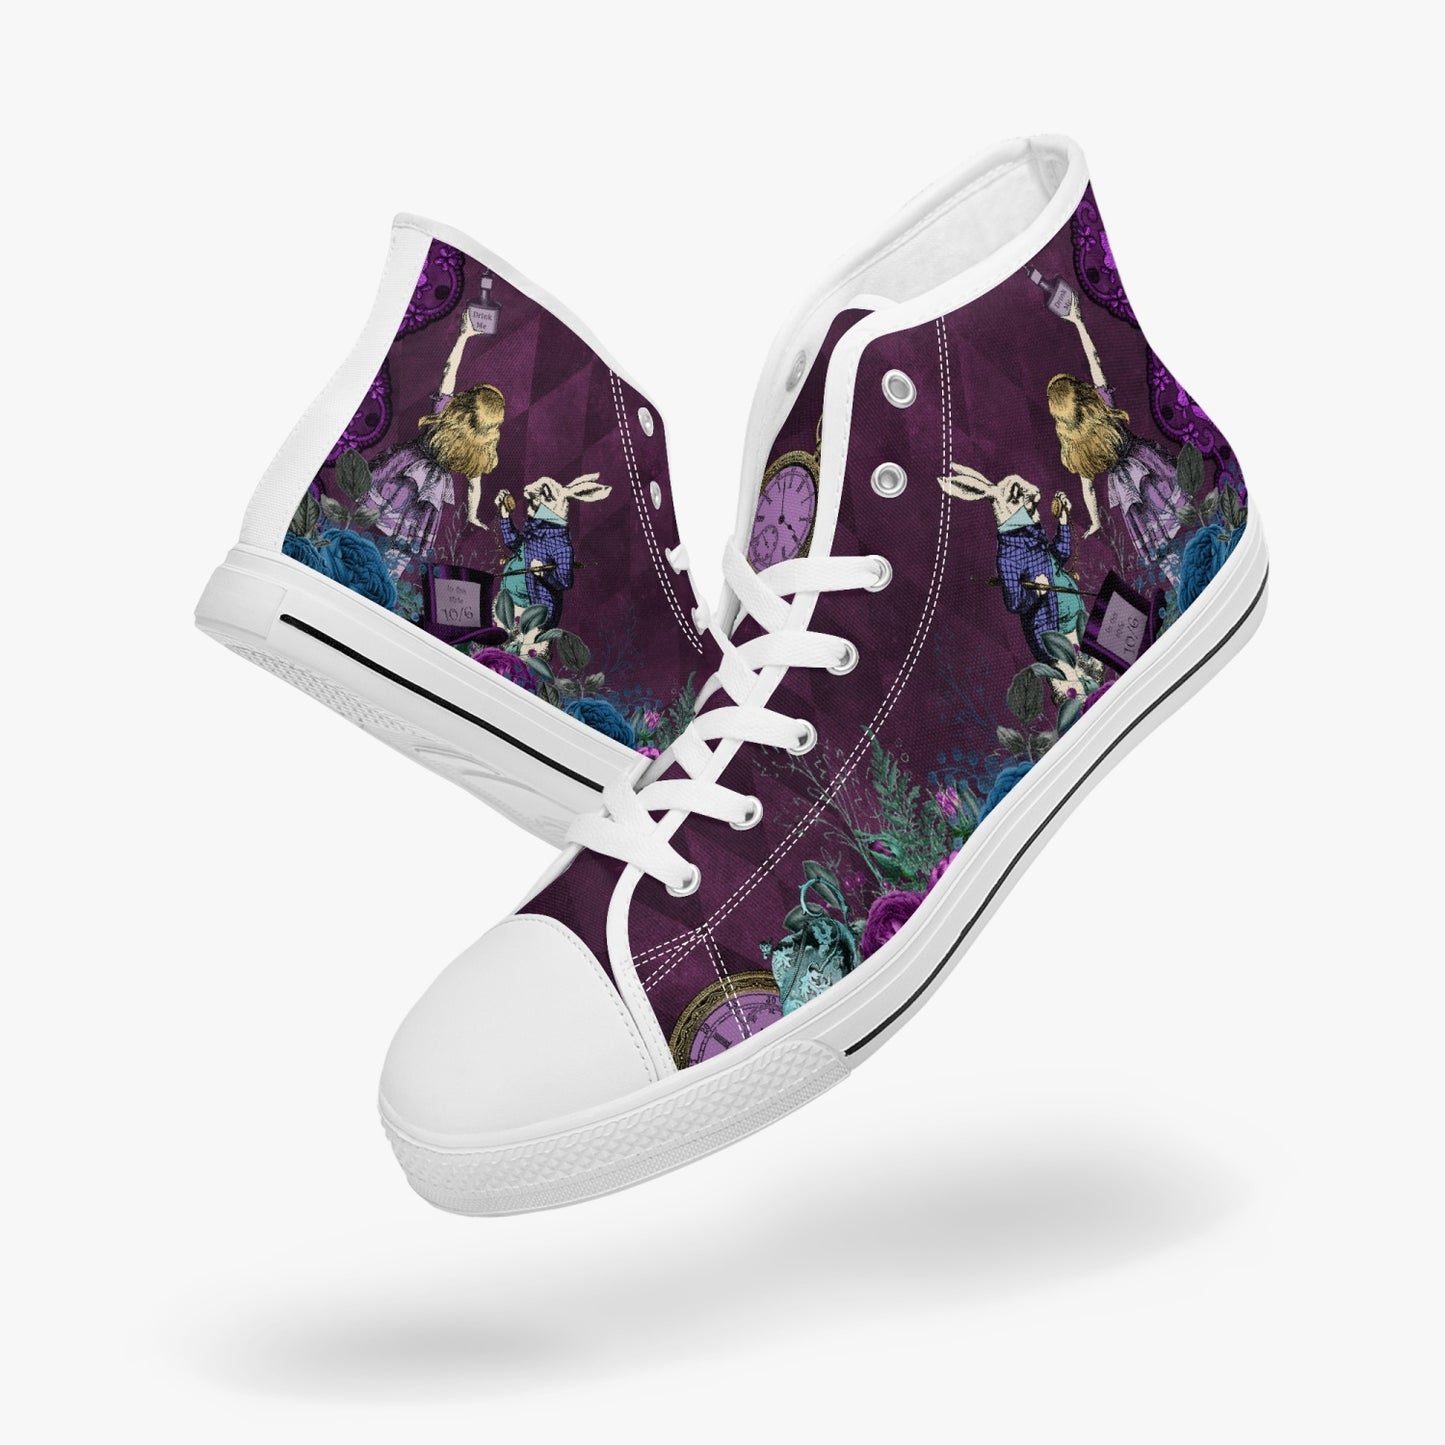 Alice in Wonderland Gothic high top womens sneakers  - The White Rabbit and Alice Pastel Goth sneakers (JPREG52)